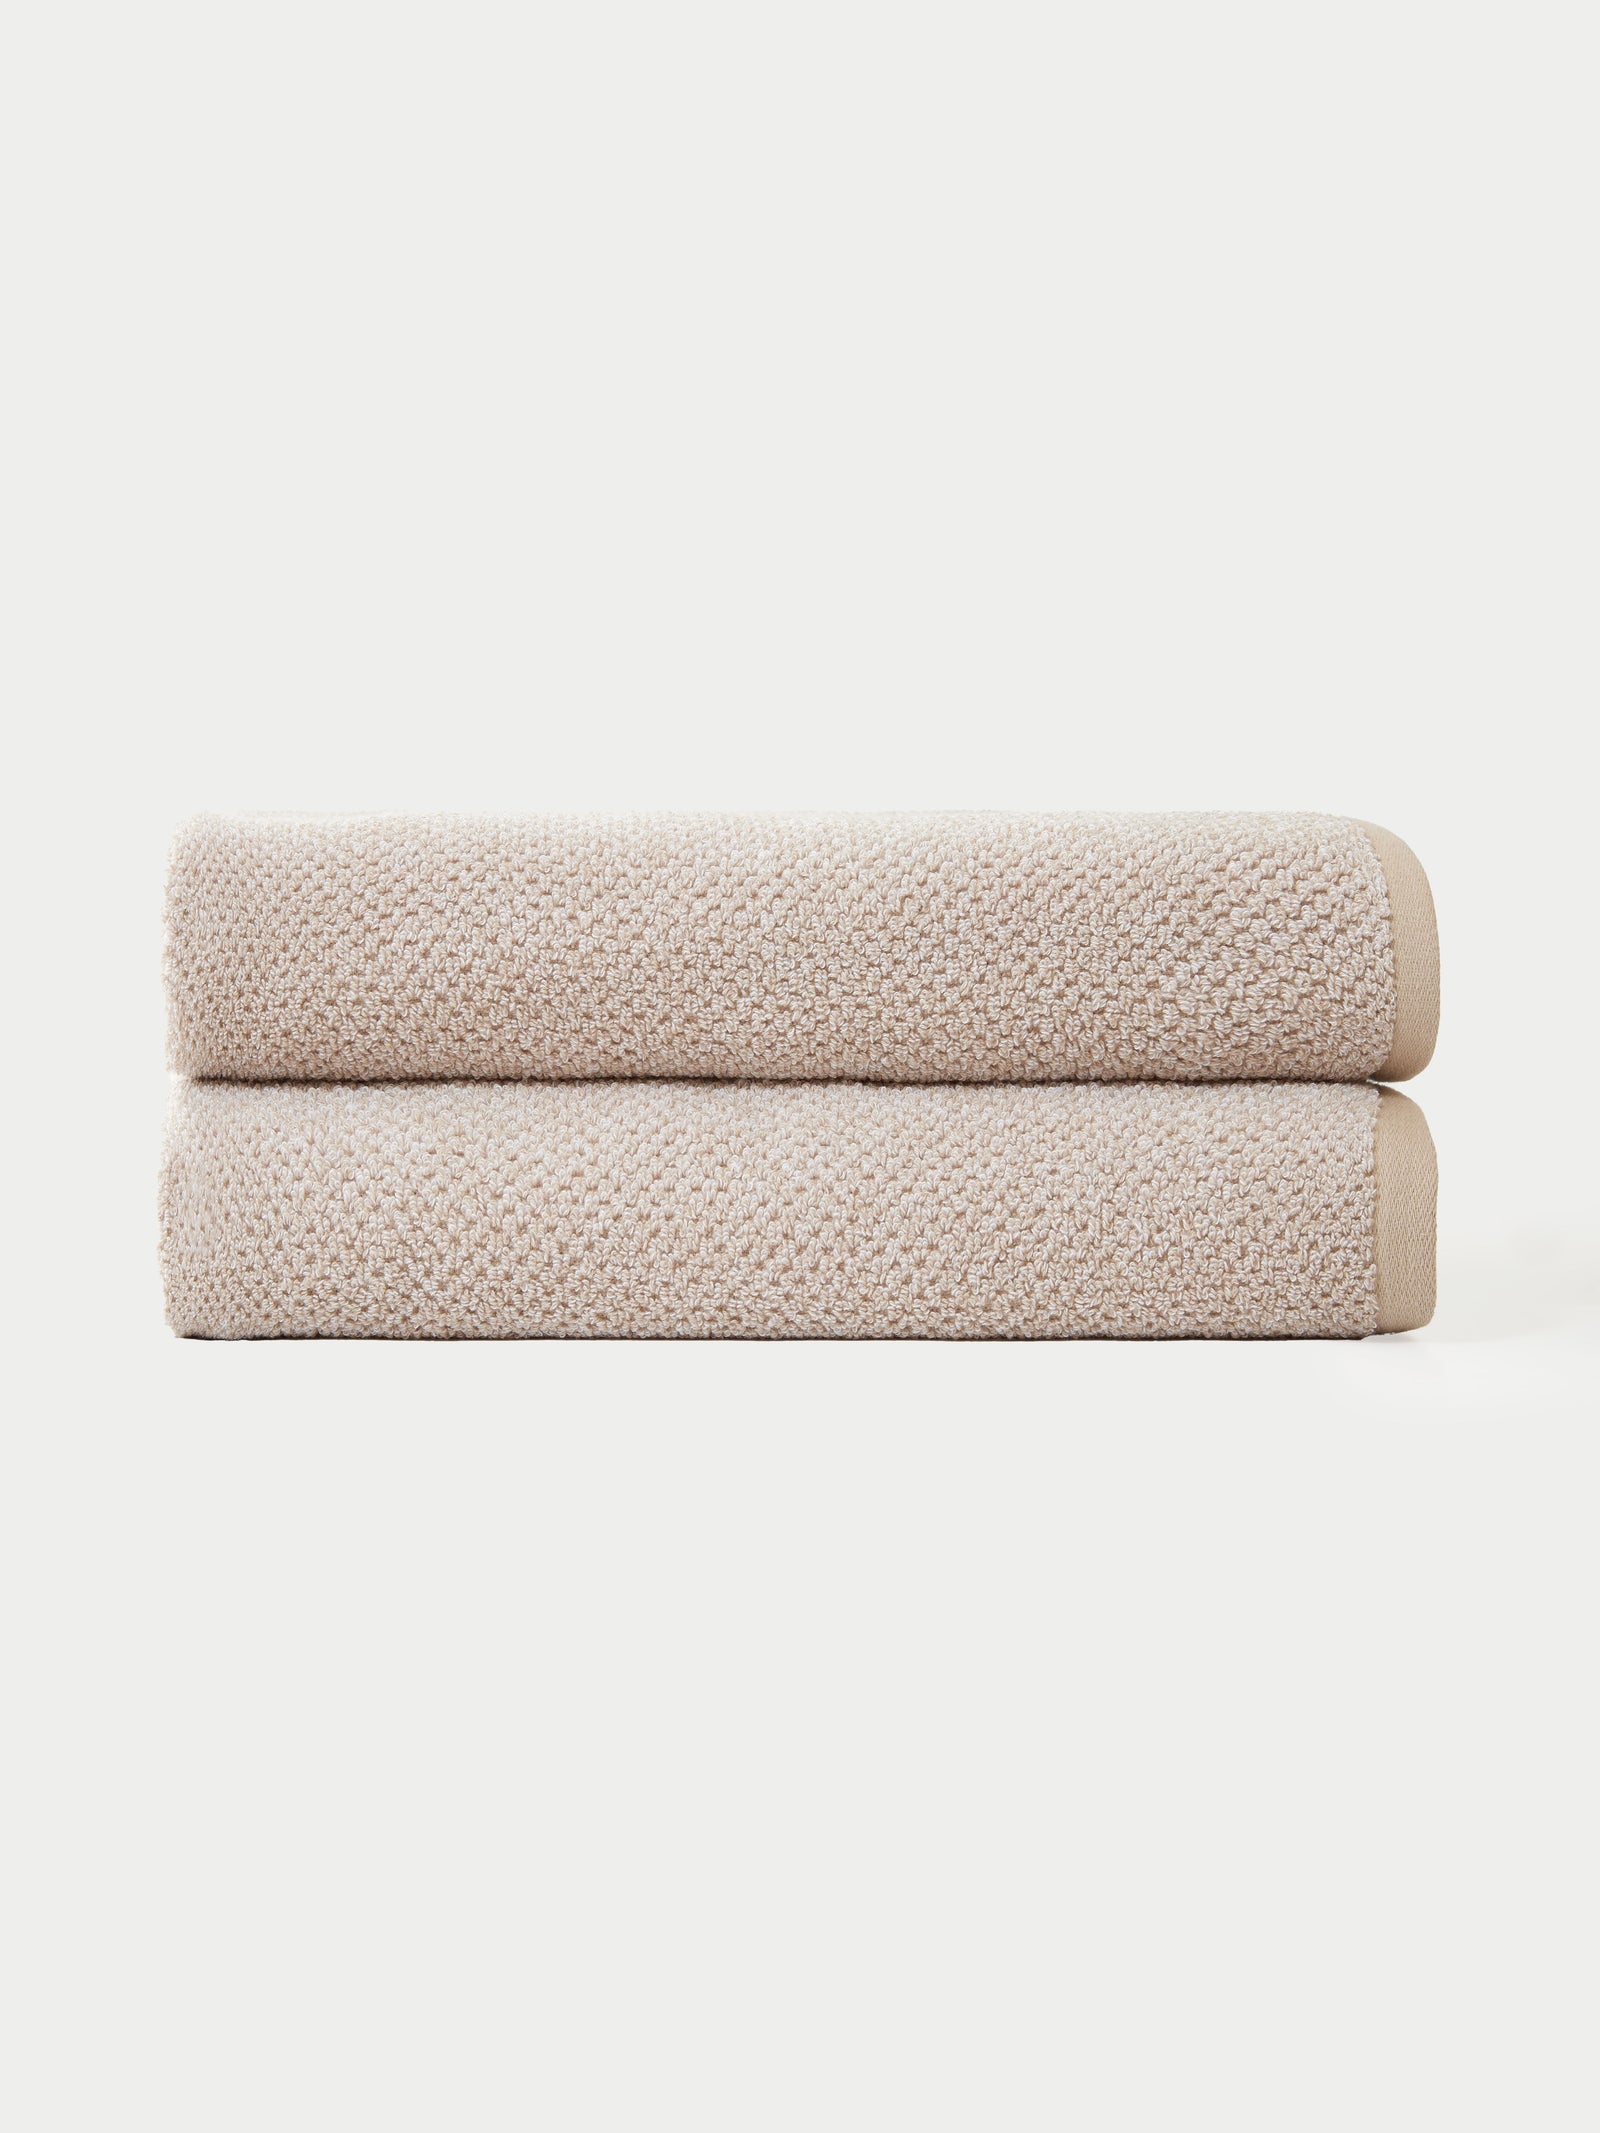 Nantucket Bath Towels in the color Heathered Sand. Photo of Nantucket Bath Towels taken with the bath towels on a white background. 